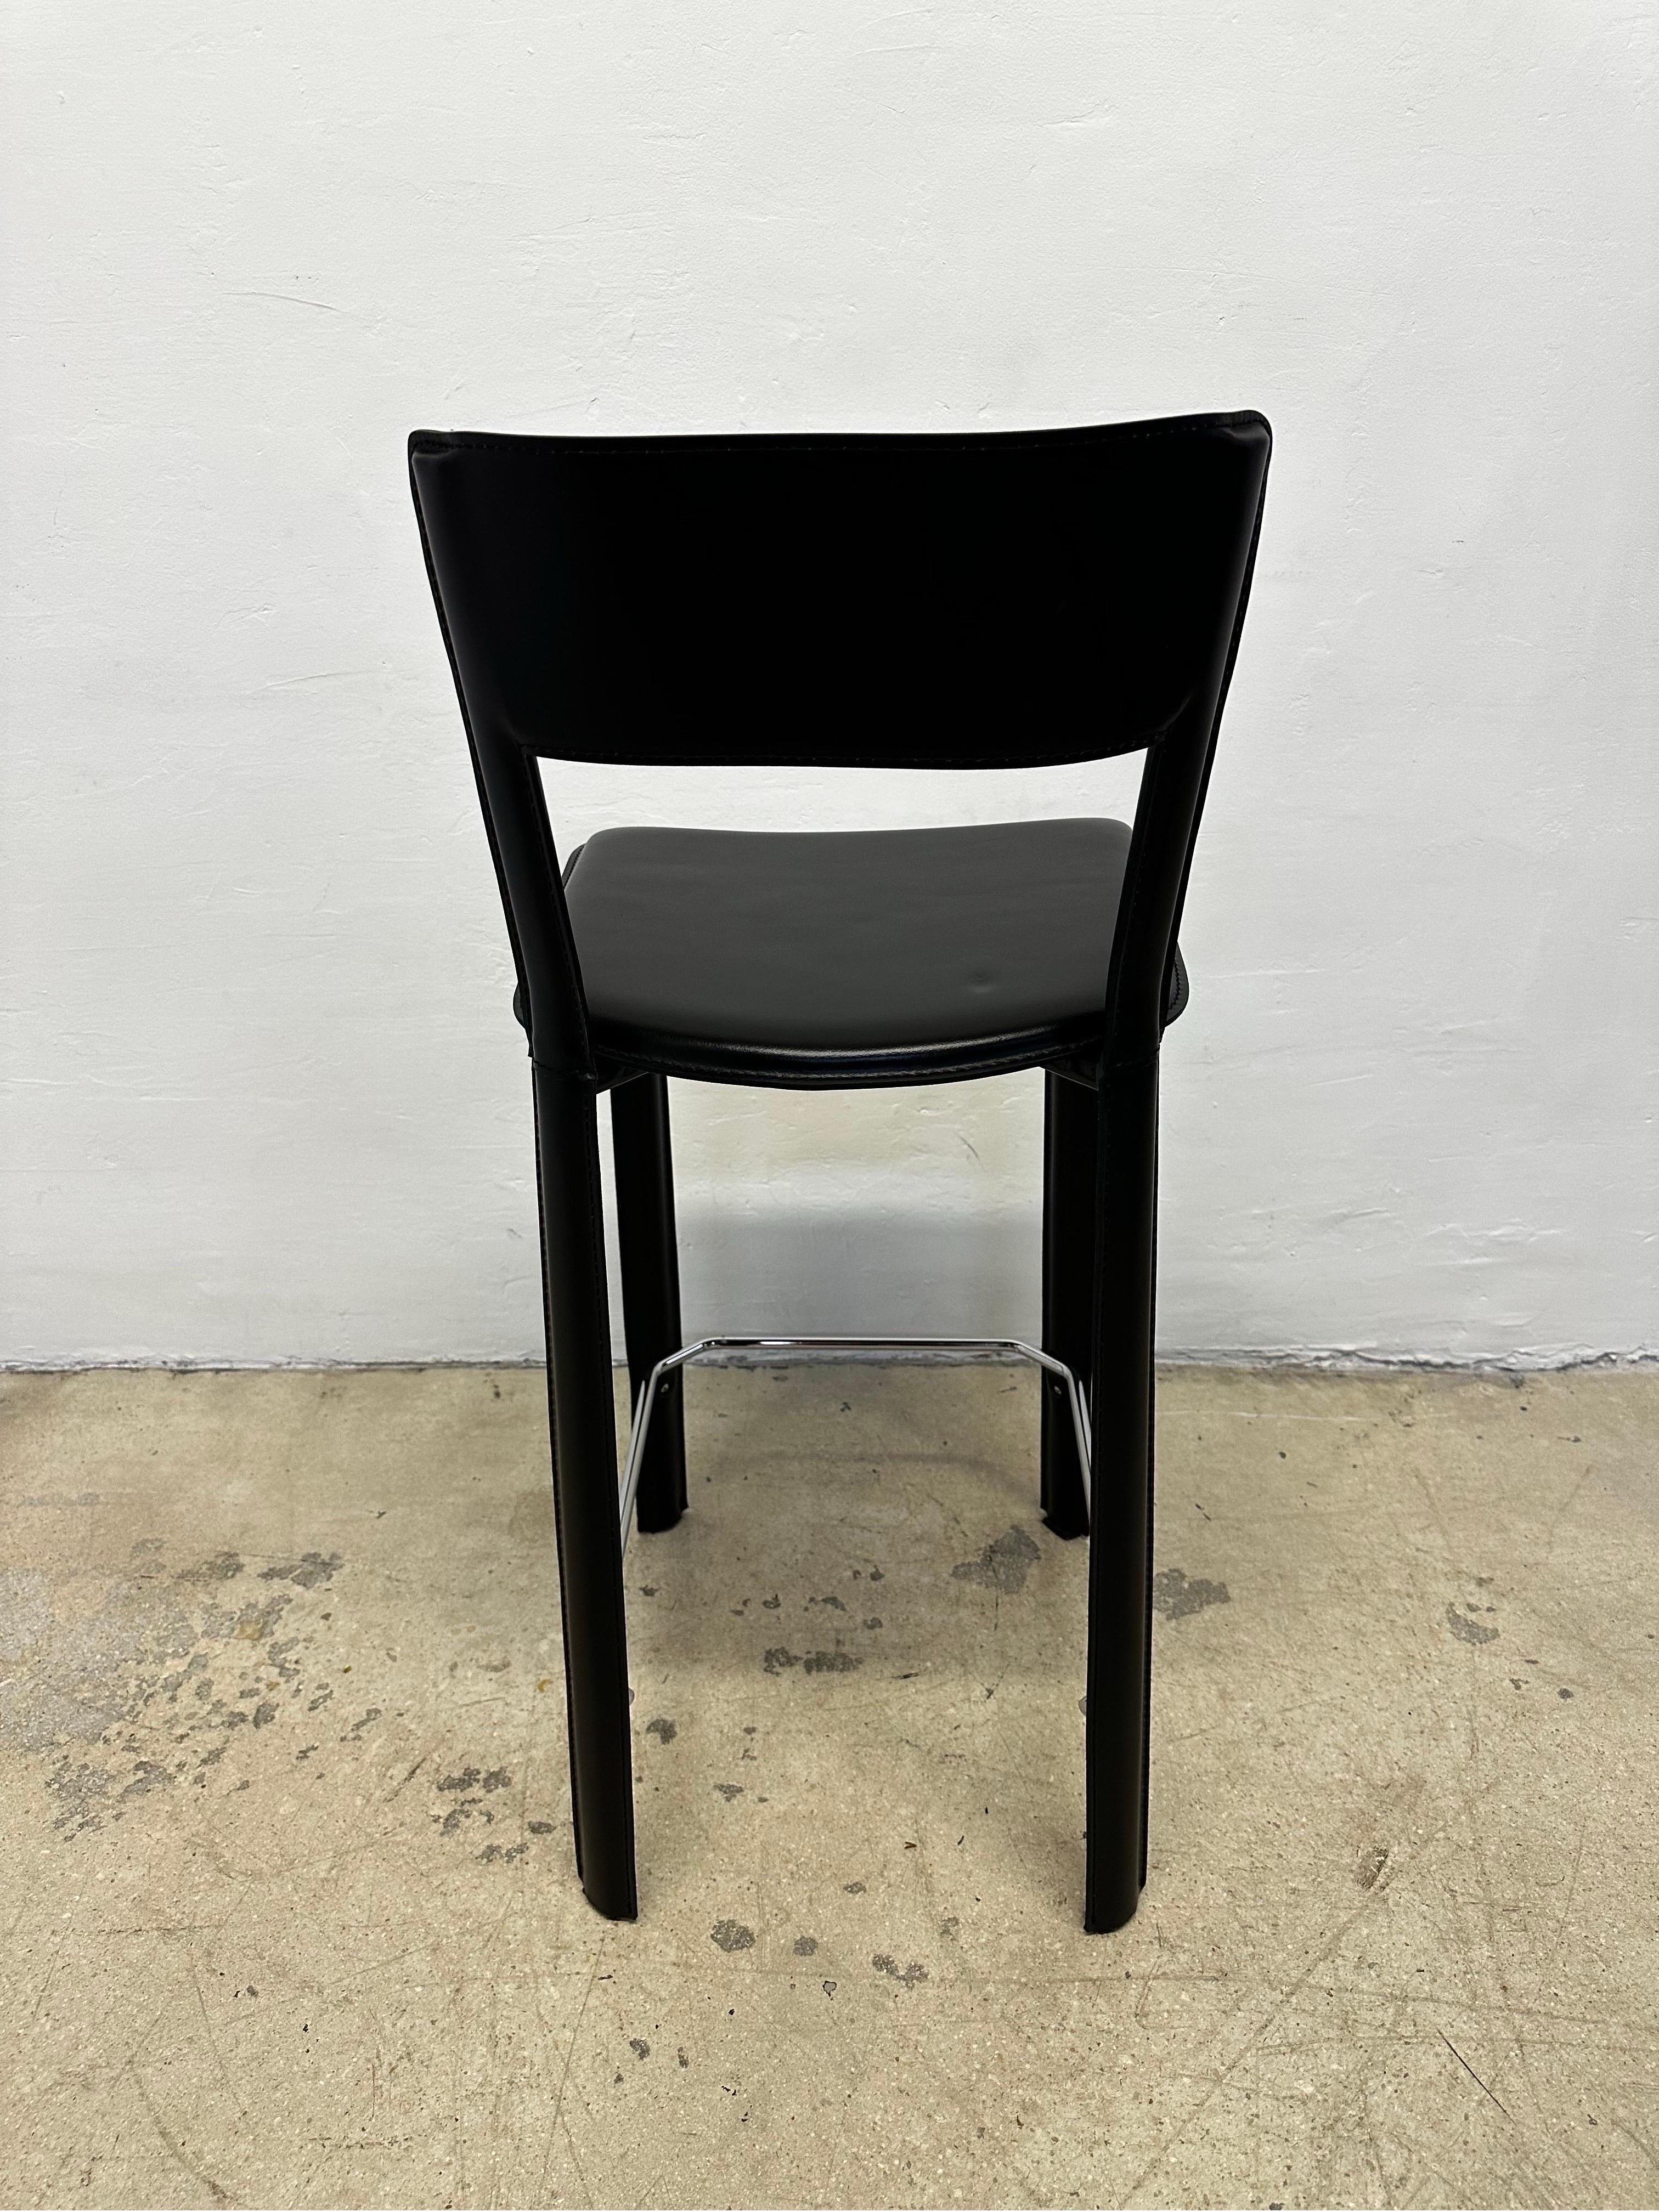 Steel Frag Italy Stitched Black Leather Counter Stools - a Pair